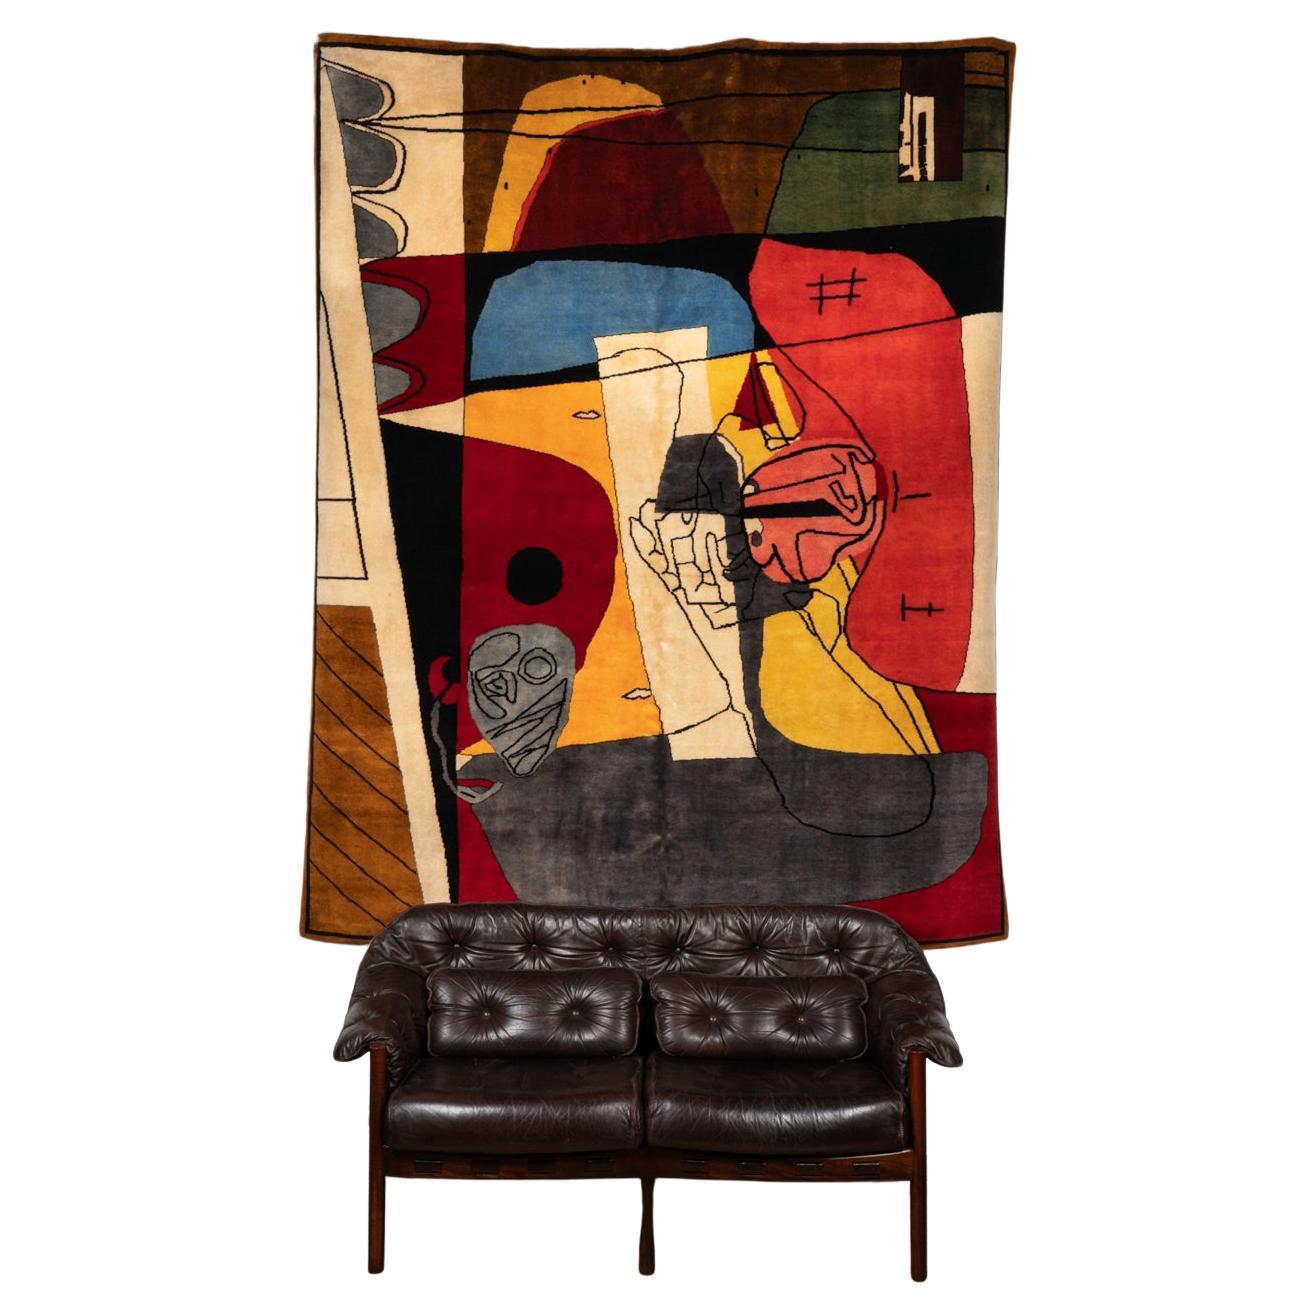 After Le Corbusier, Rug, or tapestry « Taureau XIII ». Contemporary work